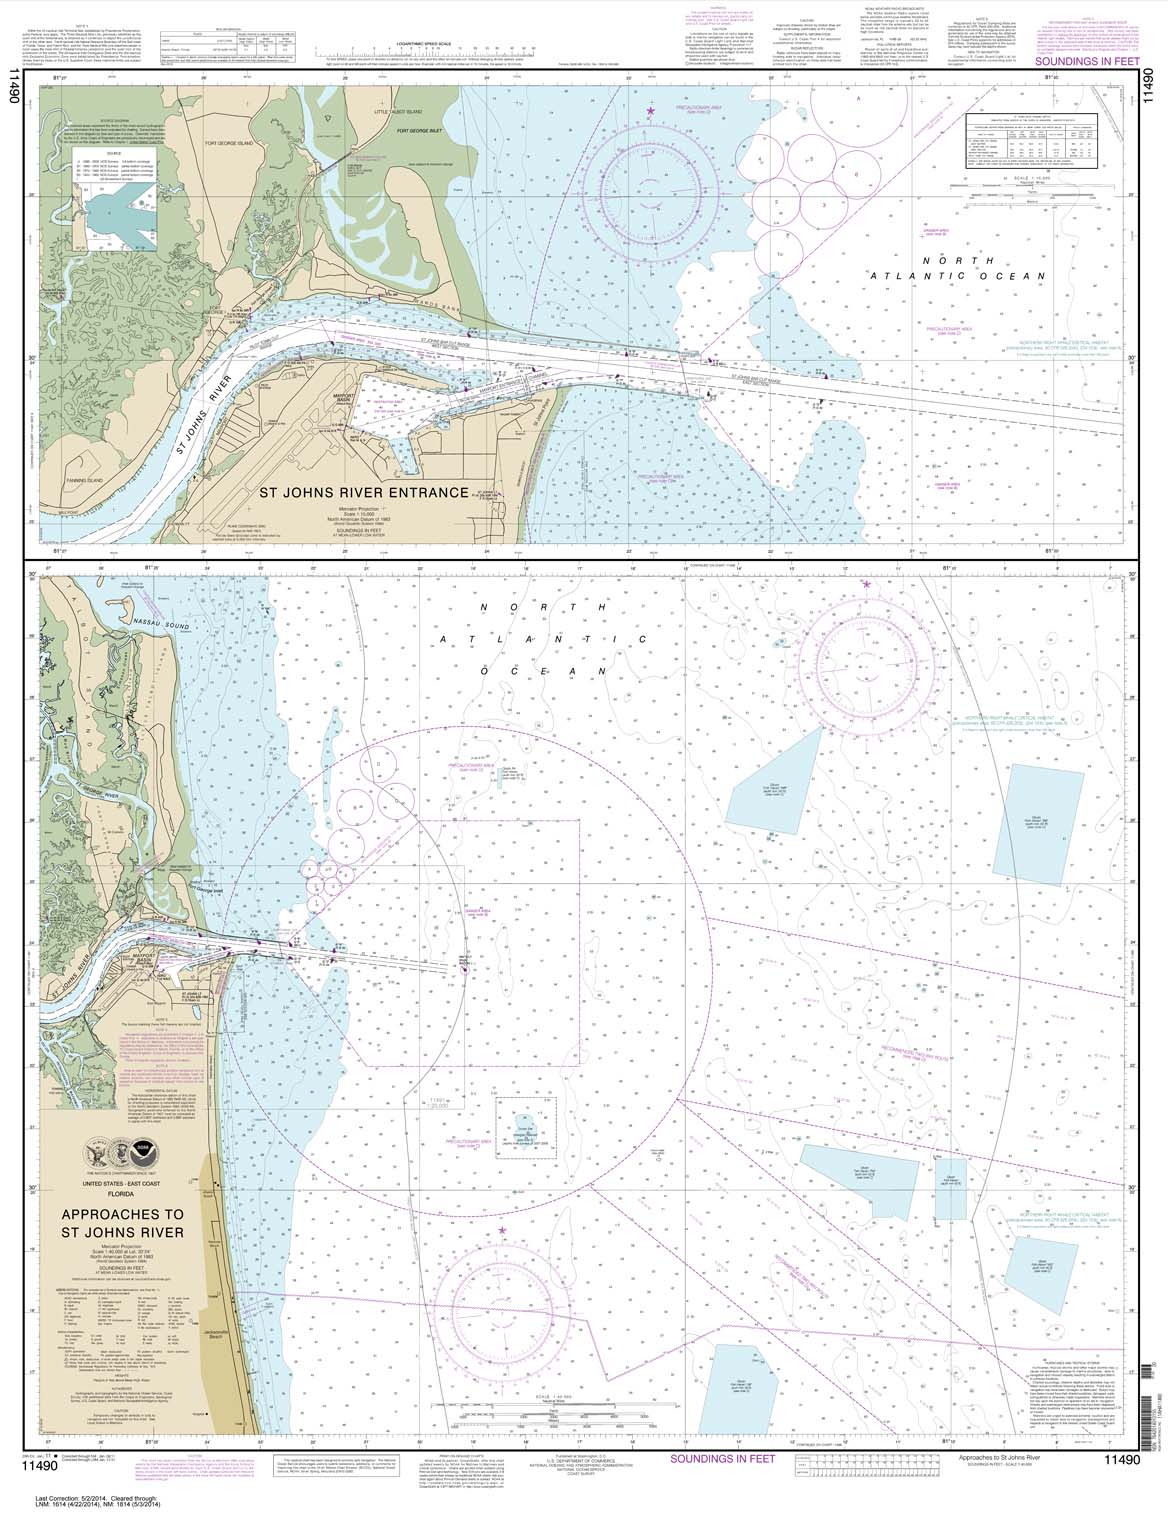 Approaches to St. Johns River;St. Johns River Entrance